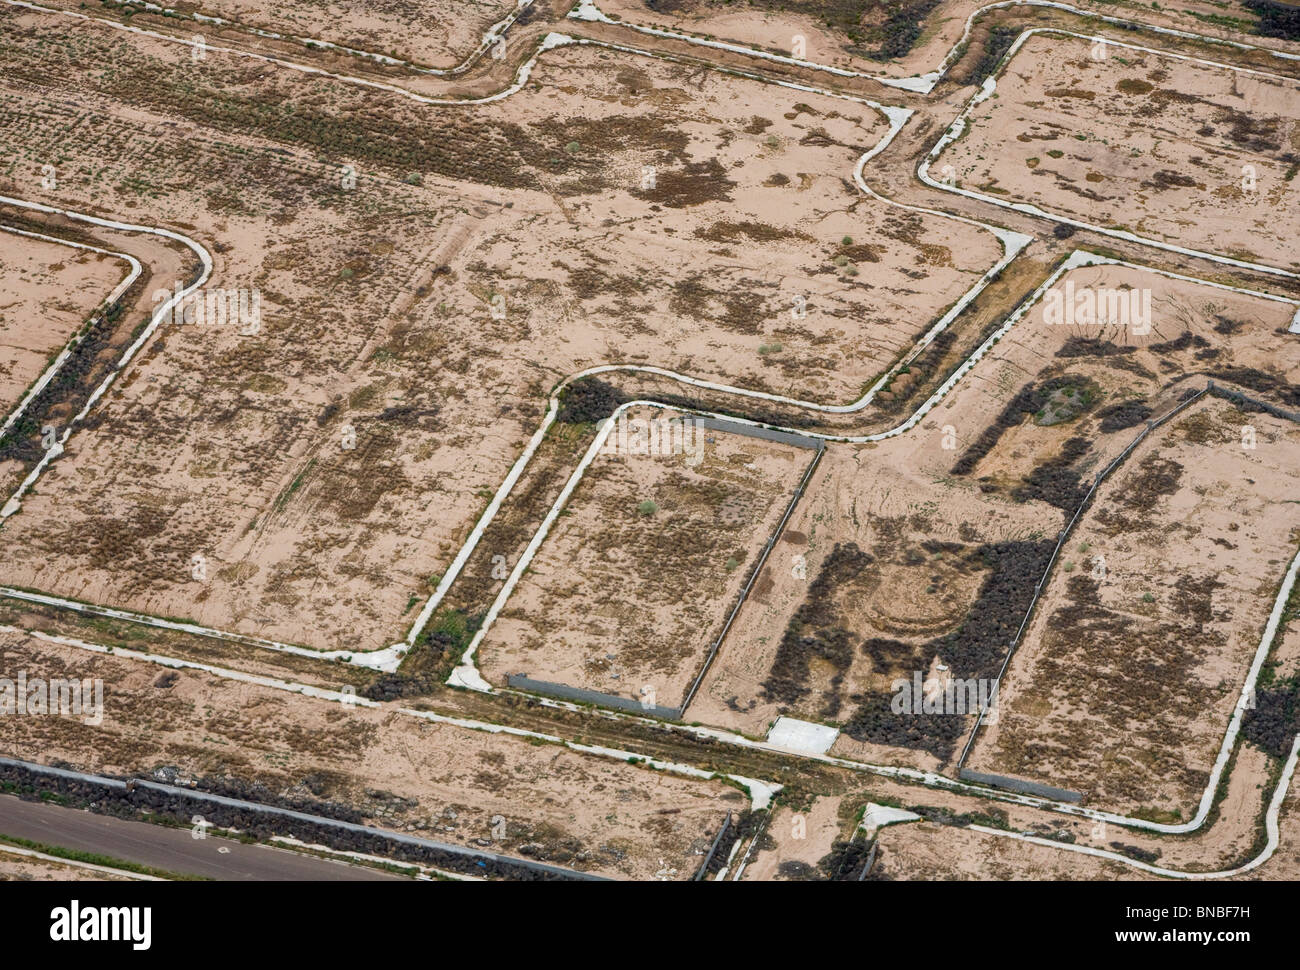 Aerial views of unfinished and abandoned housing developments in the Phoenix, Arizona area.  Stock Photo